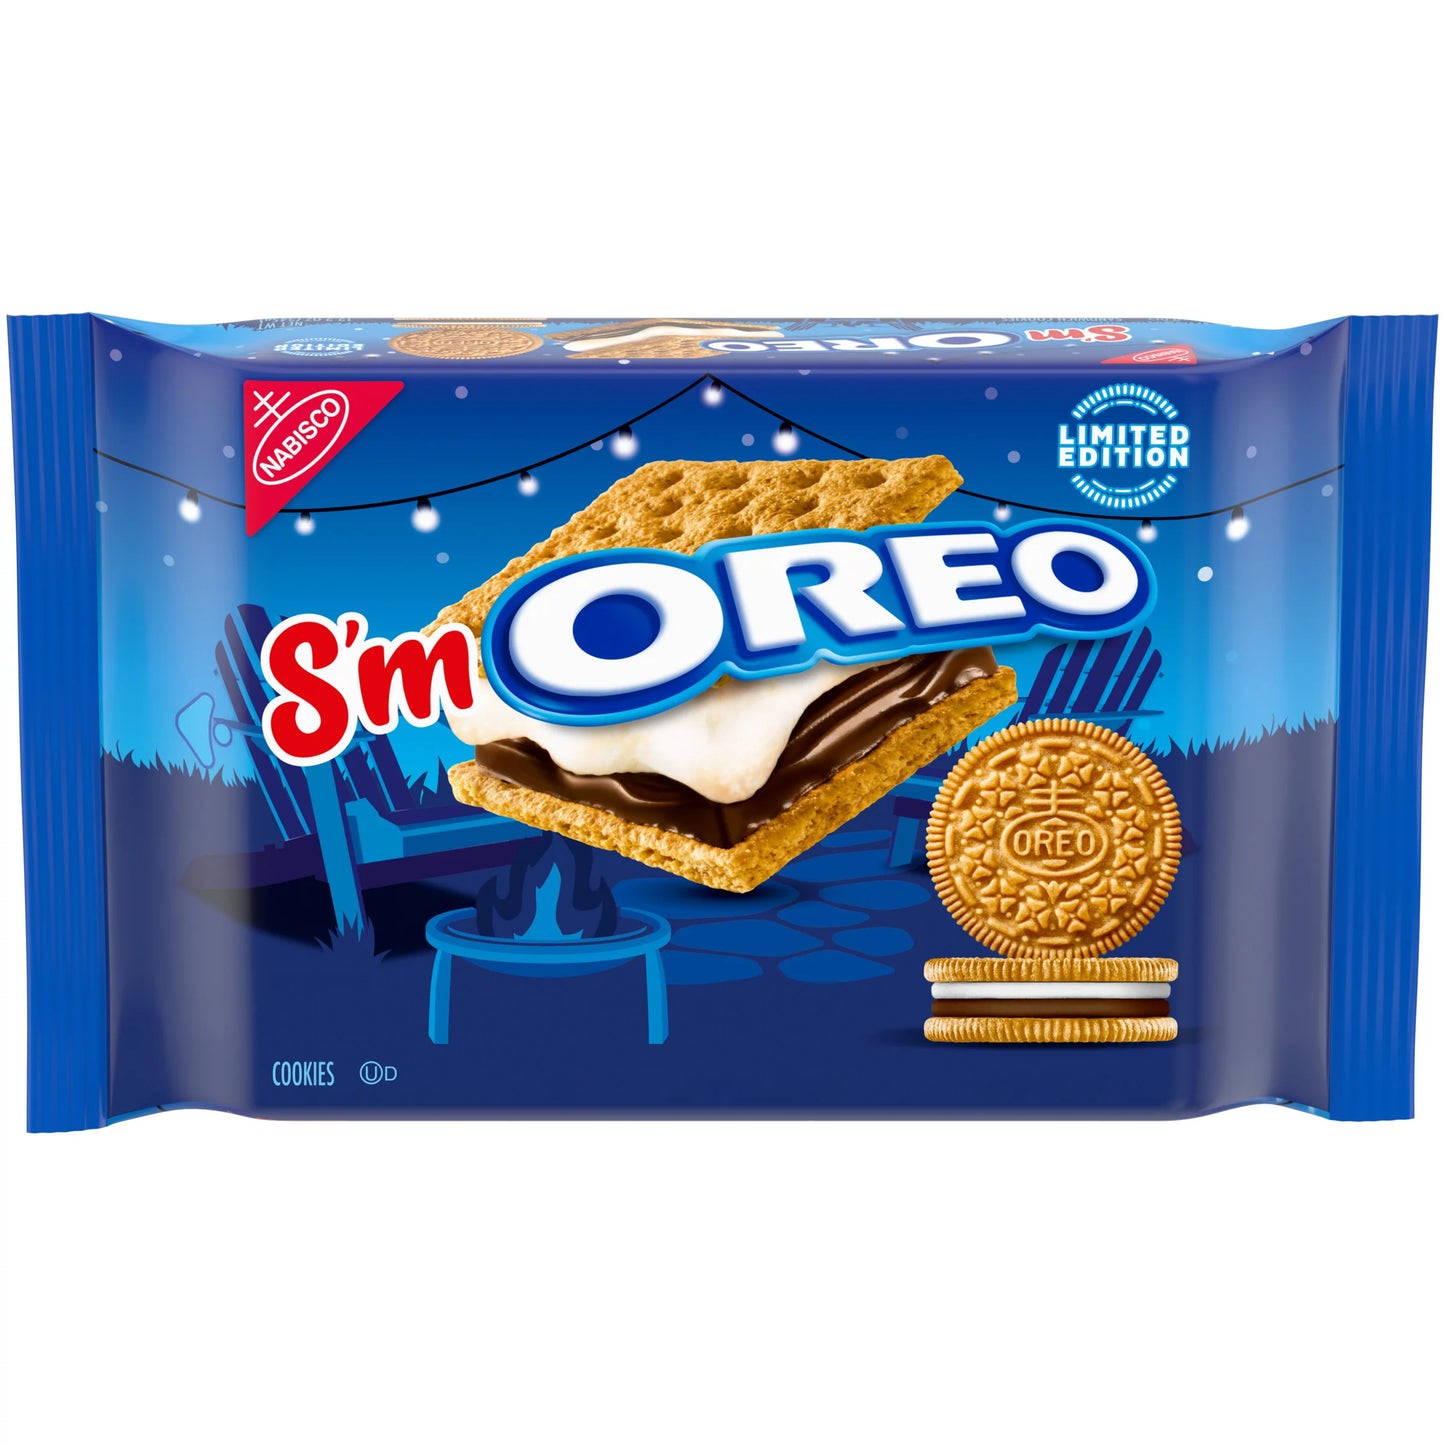 OREO S'mOREO Sandwich Cookies, Limited Edition, 12.2 oz - ULTRA RARE Oreo SMores - SOLD OUT